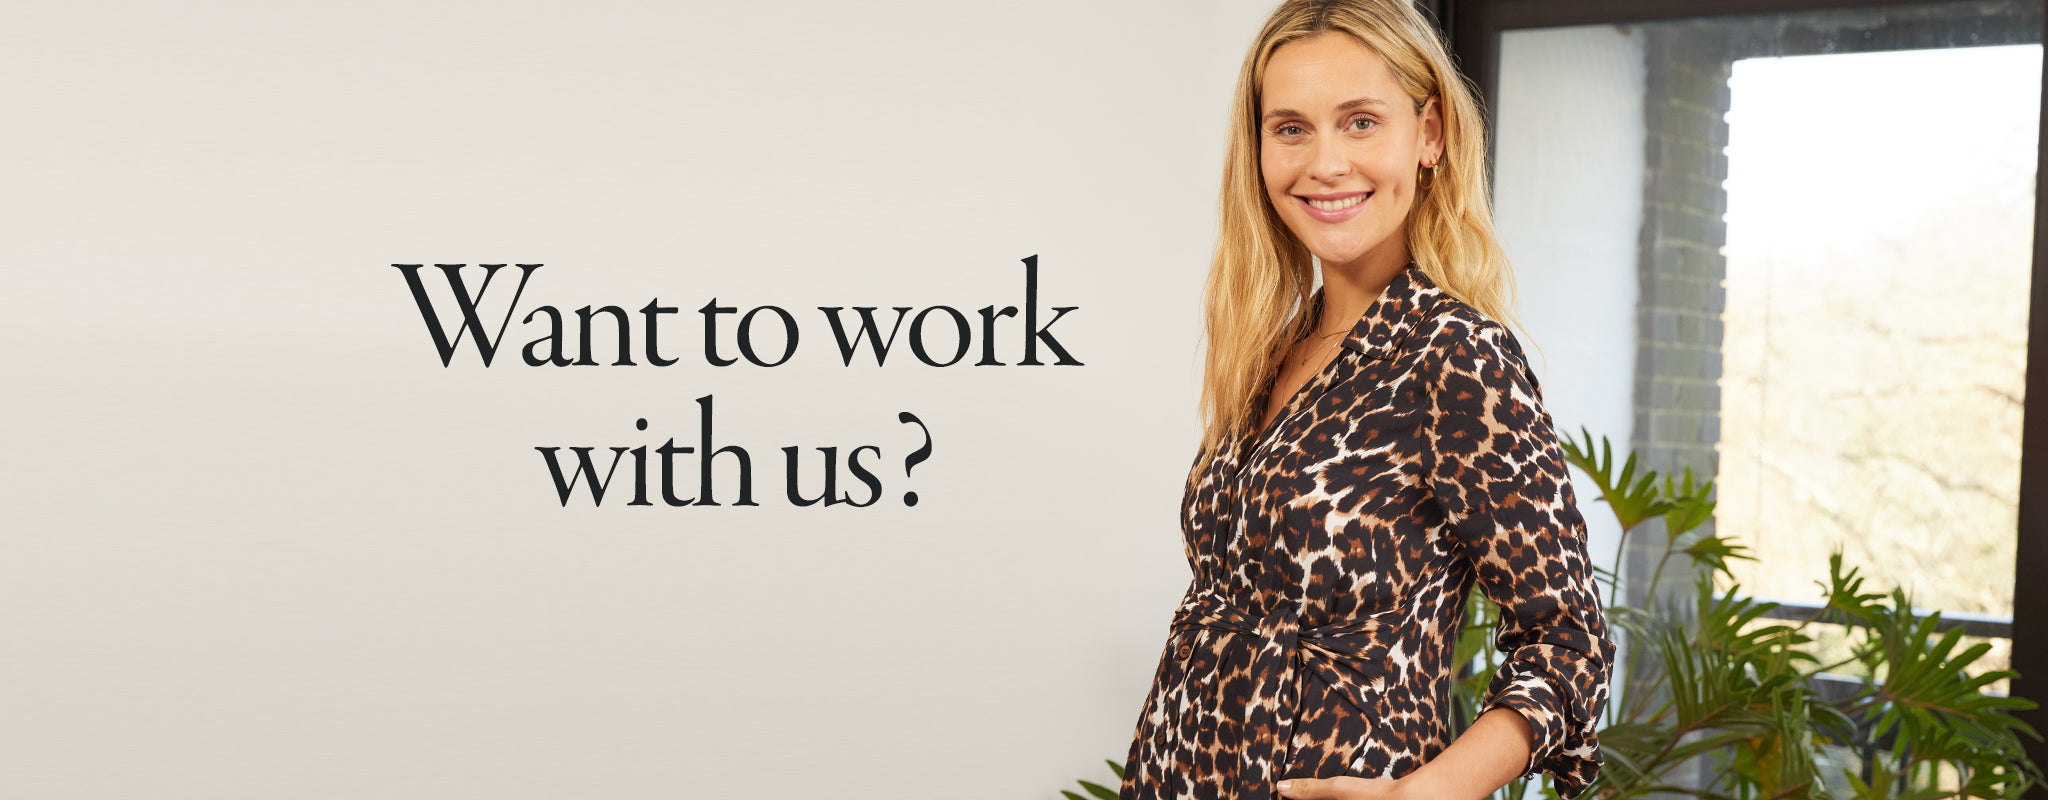 Want to work with us?